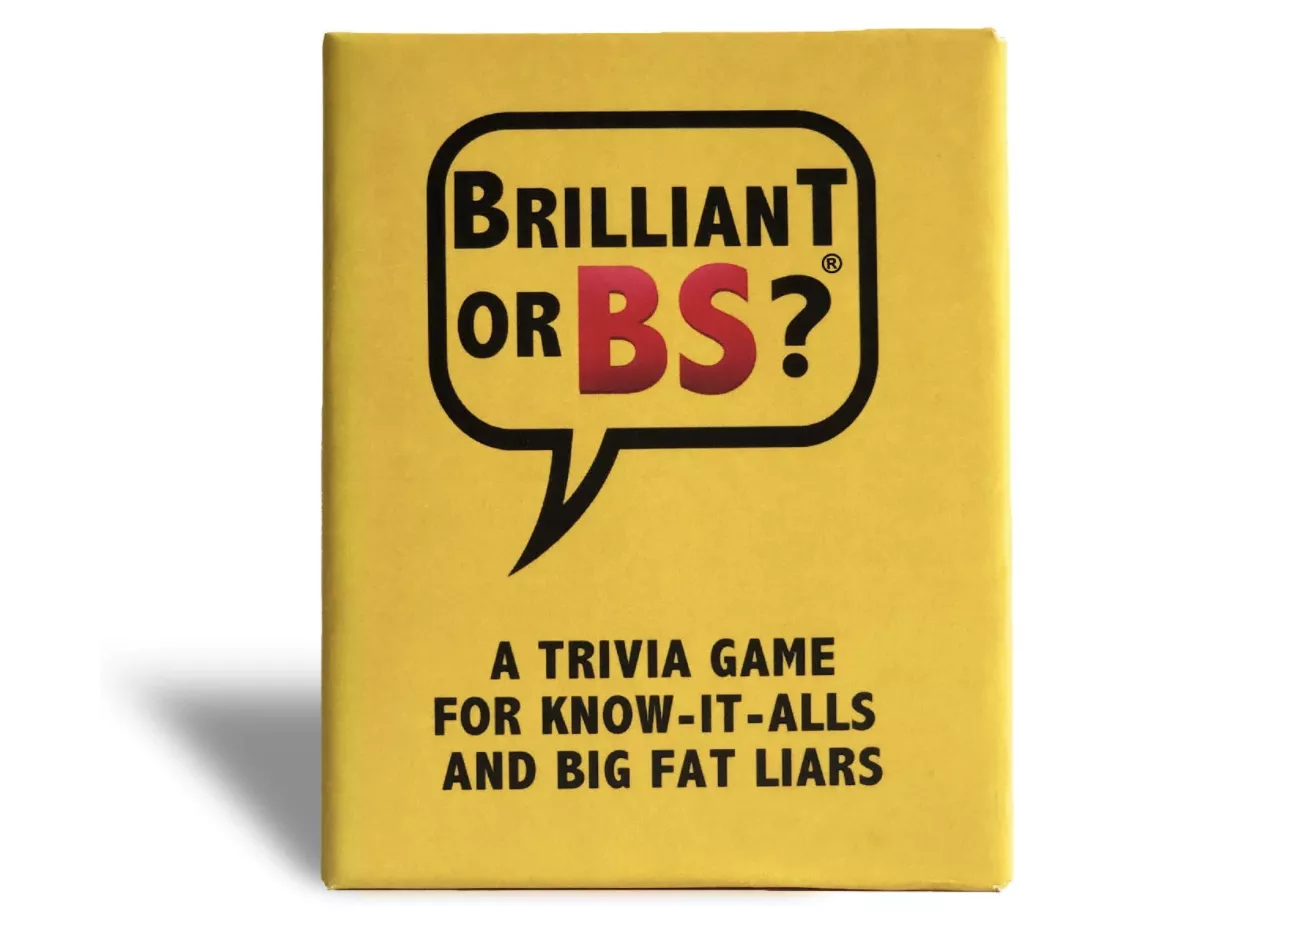 Brilliant or BS: A Trivia Game for Knot It Alls and Big Fat Liars